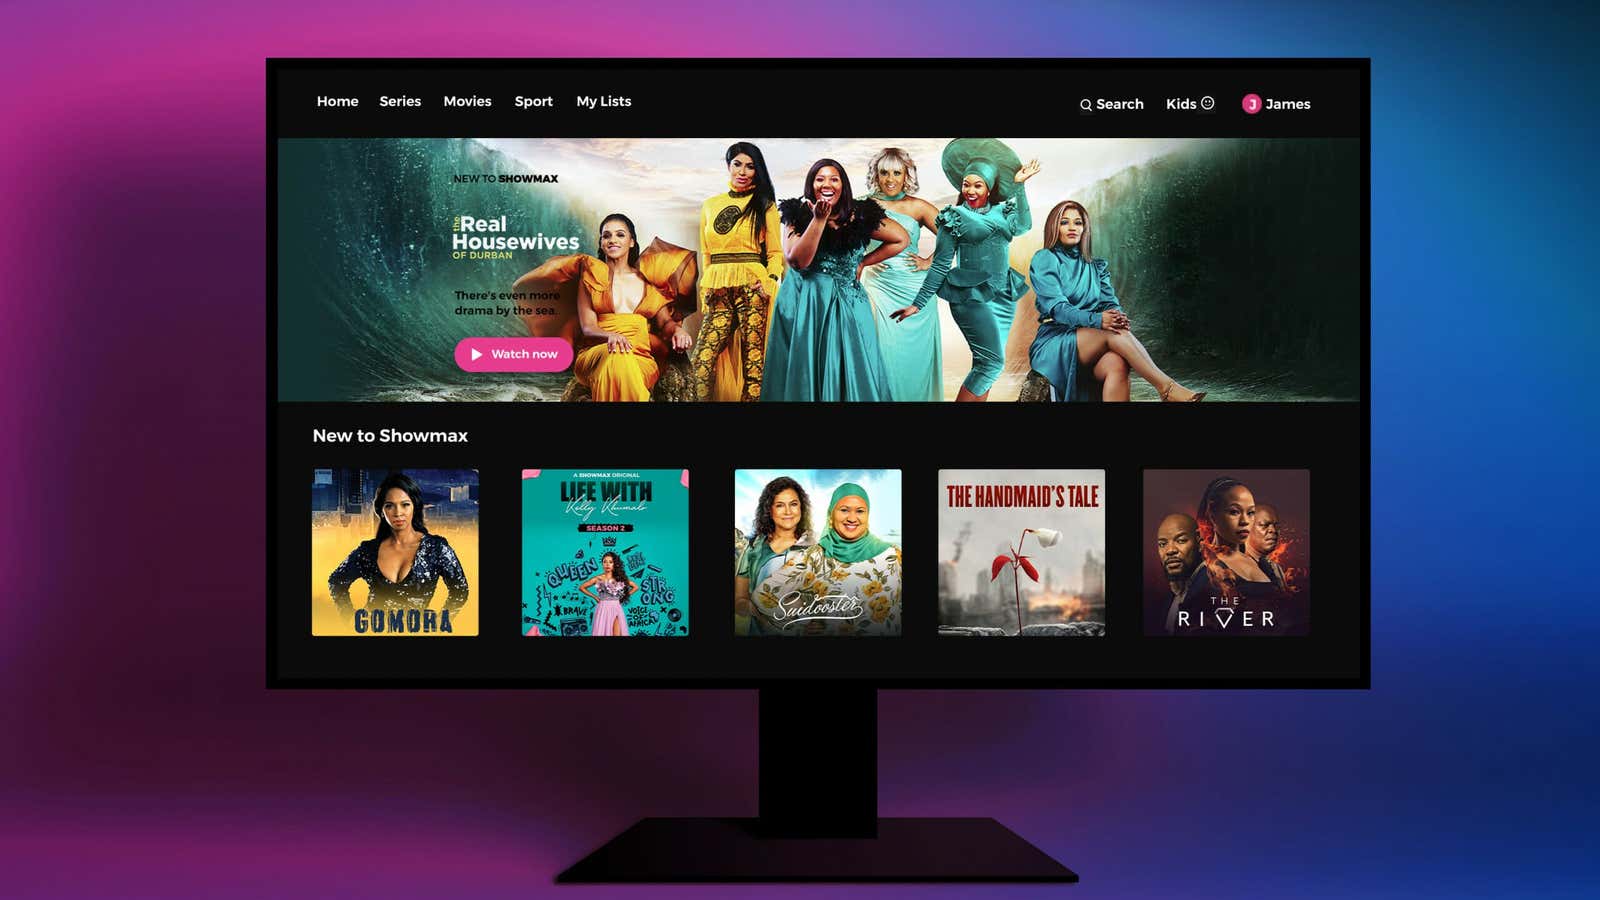 Showmax is a popular local streaming service.